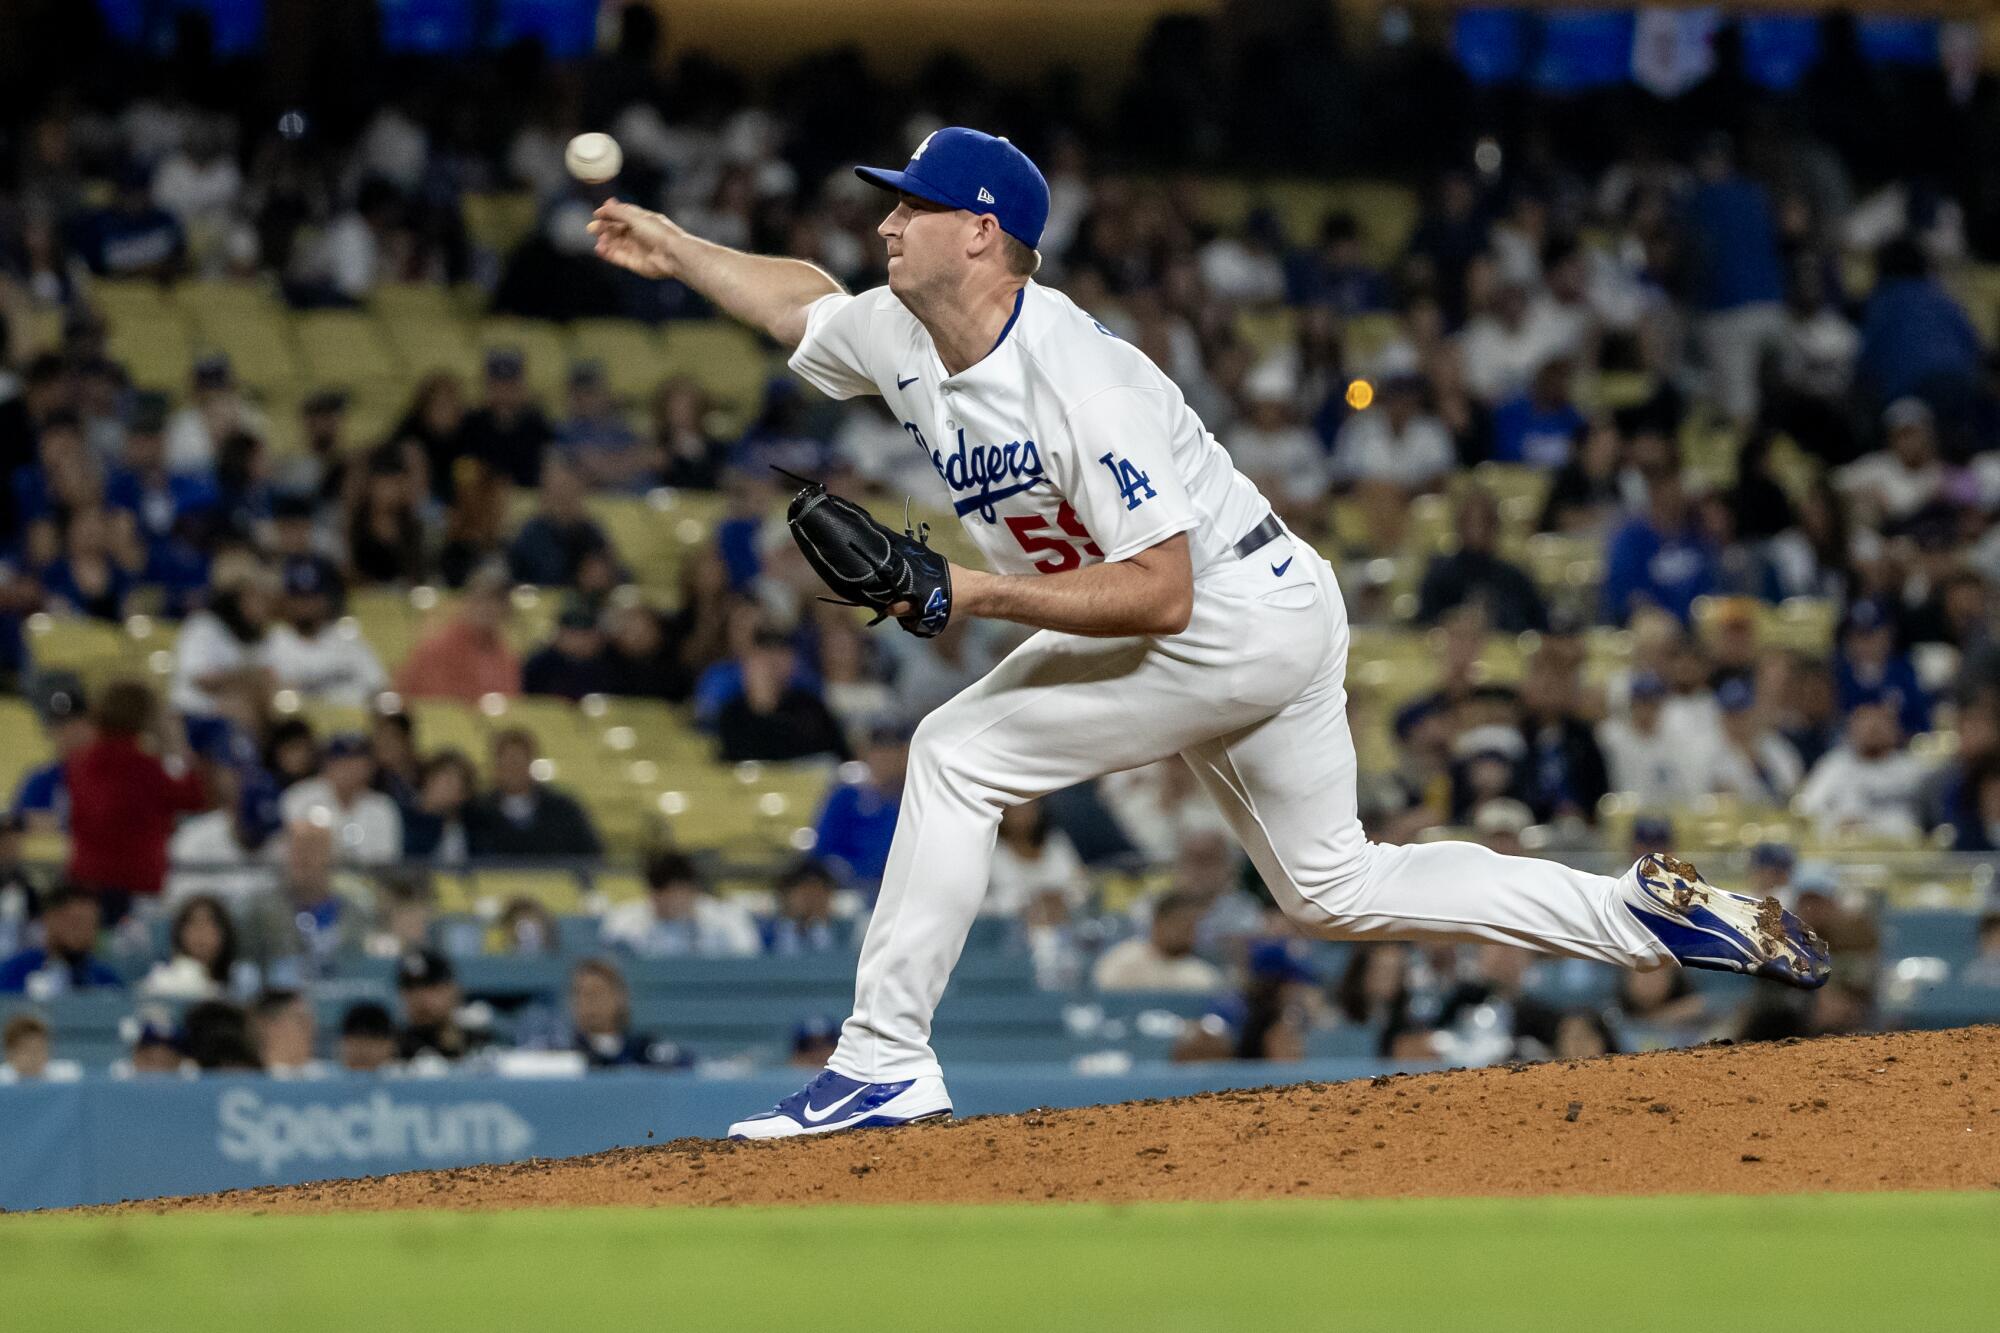 Dodgers relief pitcher Evan Phillips pitches against the Pirates at Dodger Stadium on July 3.